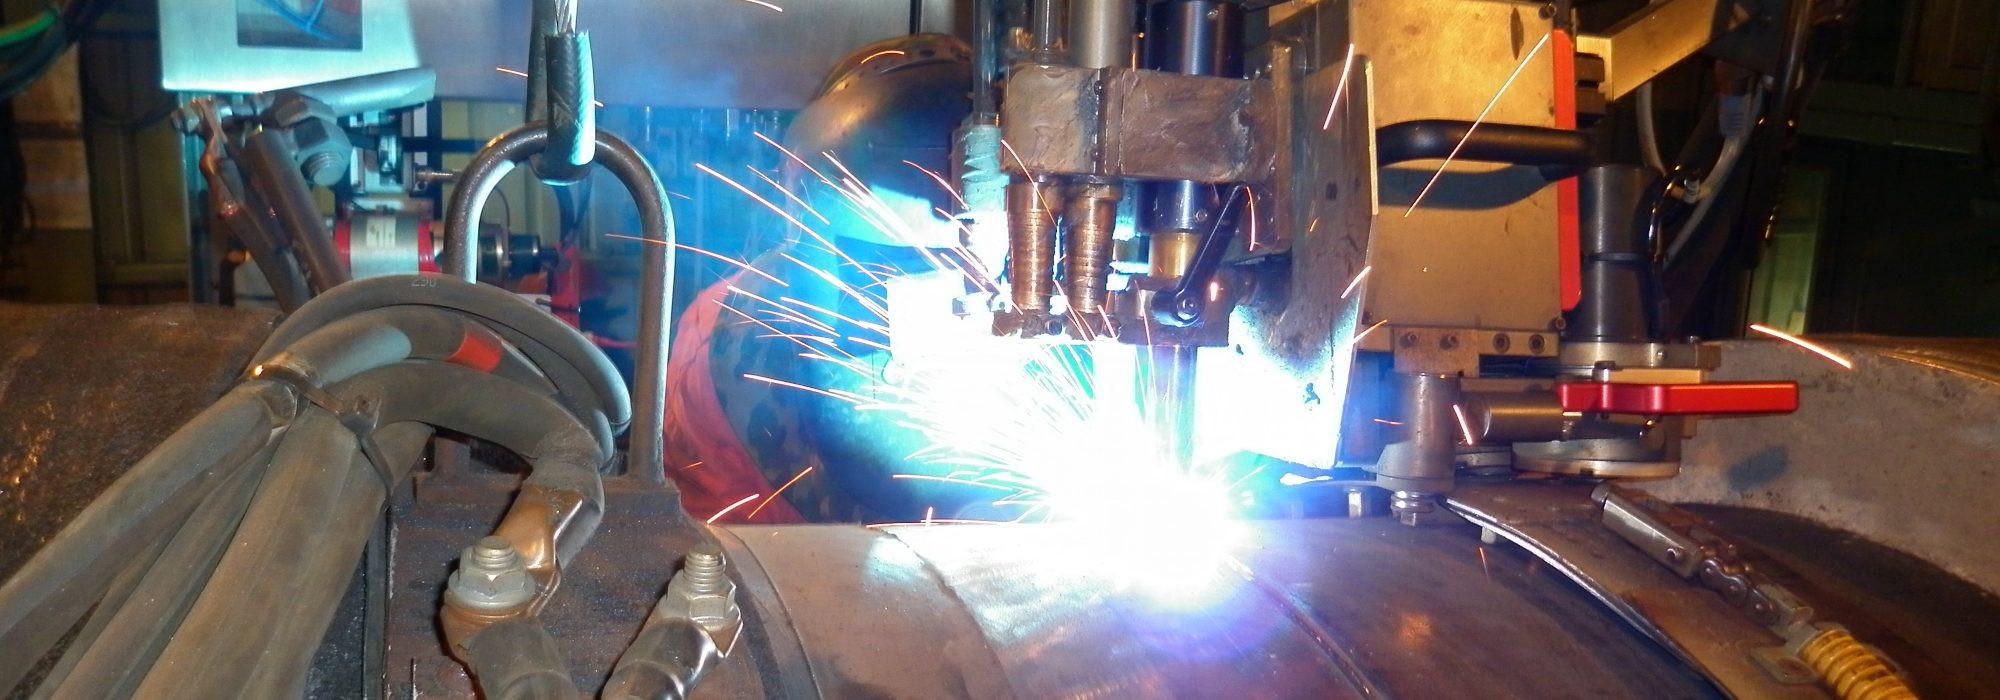 Hold the lay barge. Shop for welding inside the lay barge.